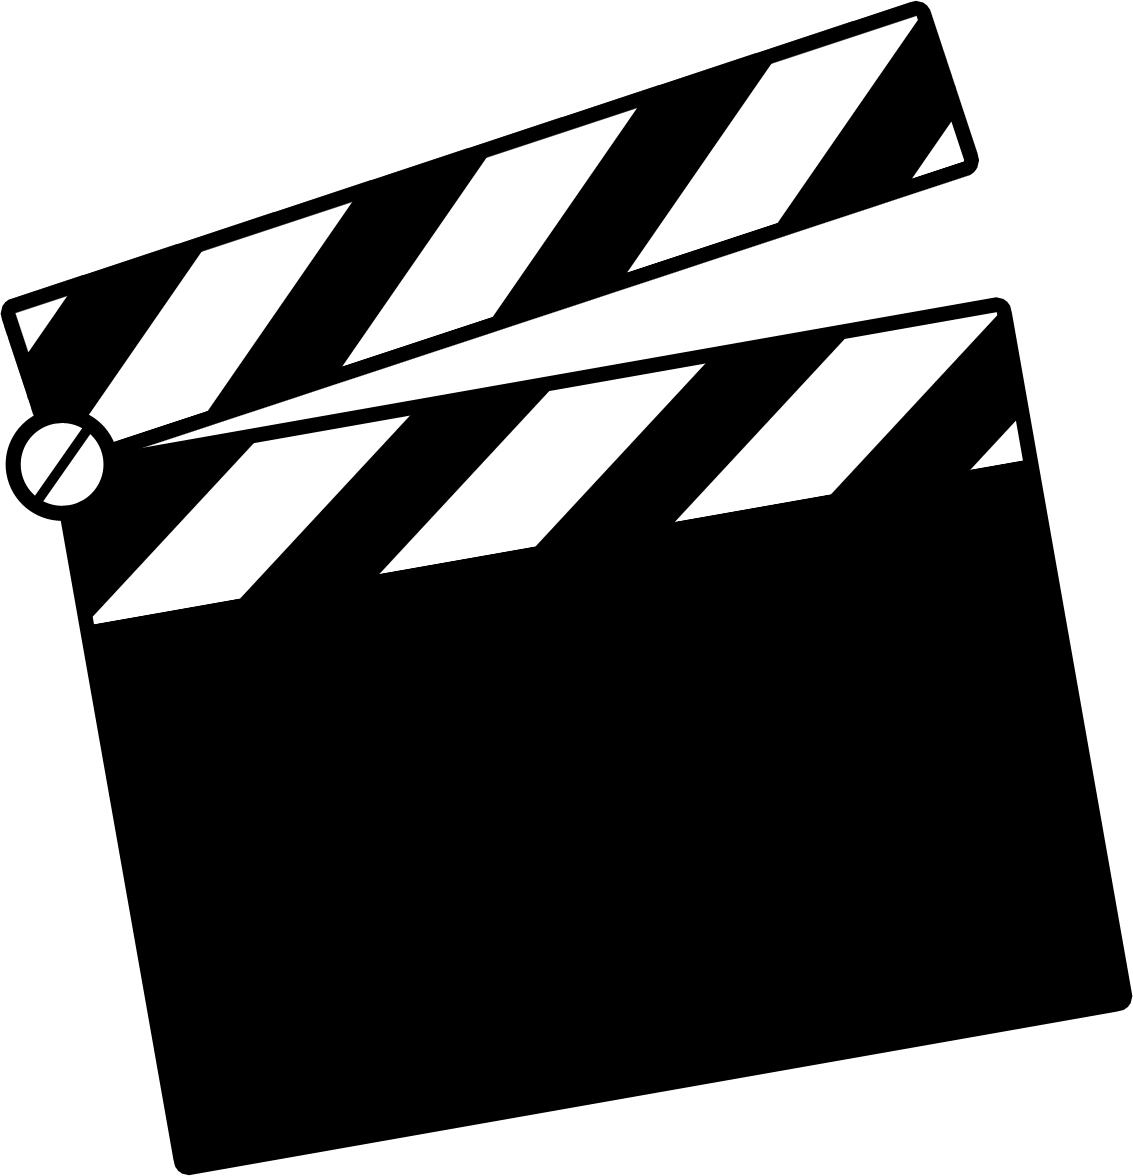 Image of Clapboard Clipart #6664, Movie Clapboard Drawing ...